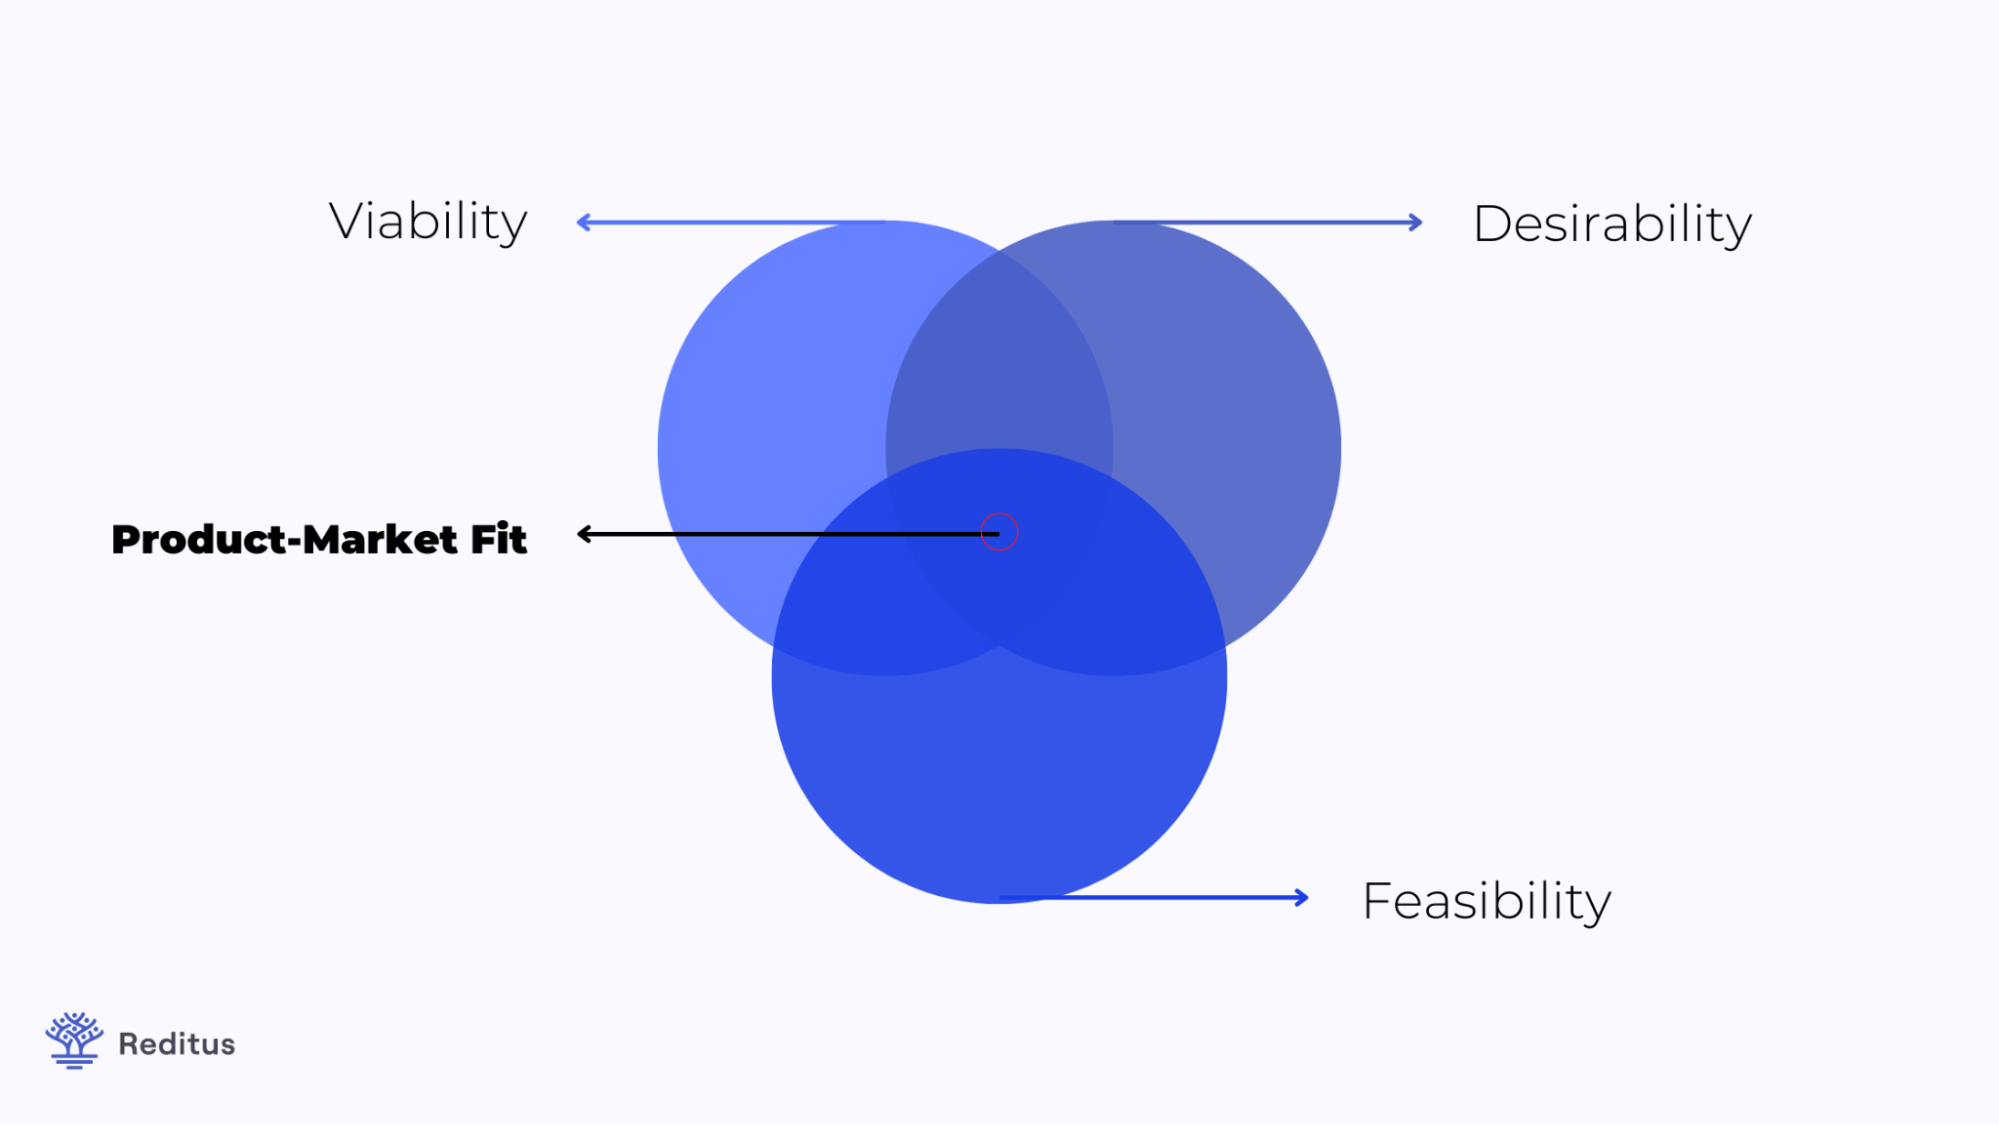 Visual Explanation of Product-Market Fit